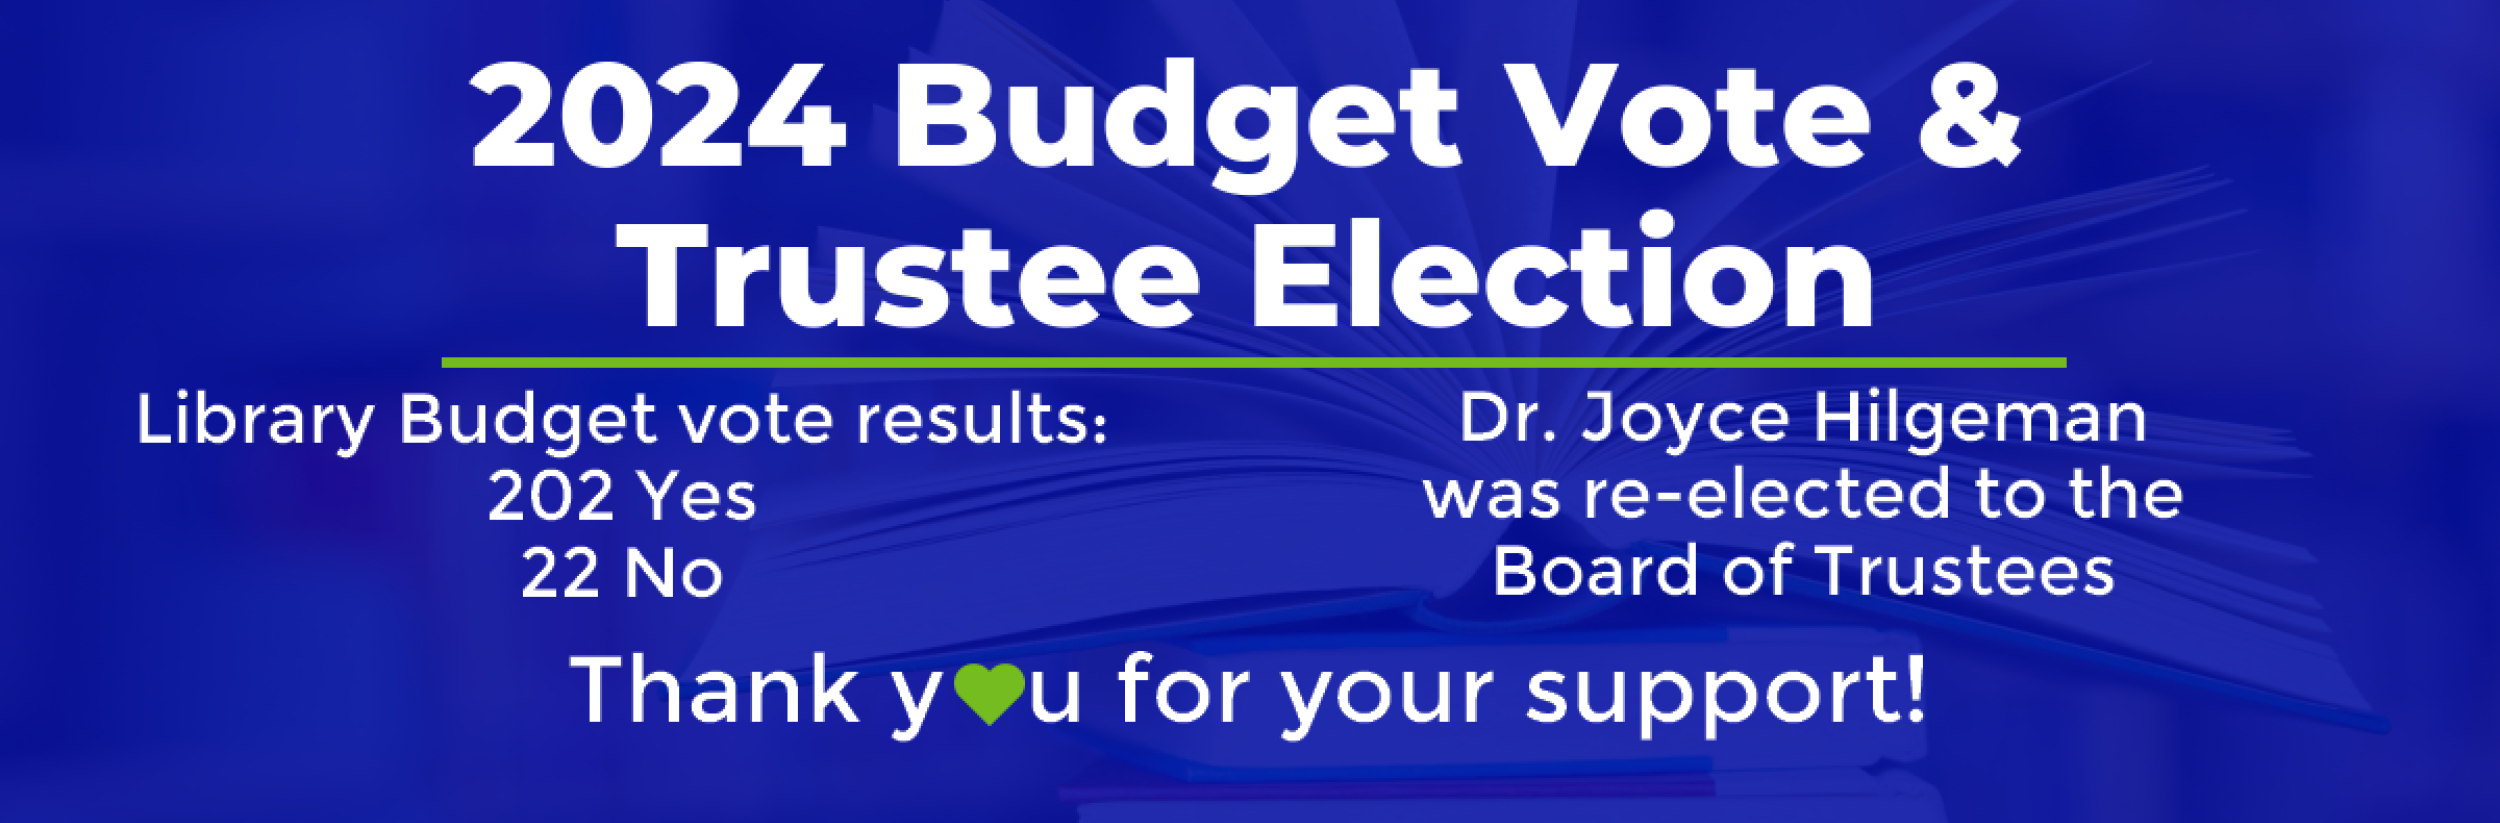 Image for "2024 Budget Vote & Trustee Election"